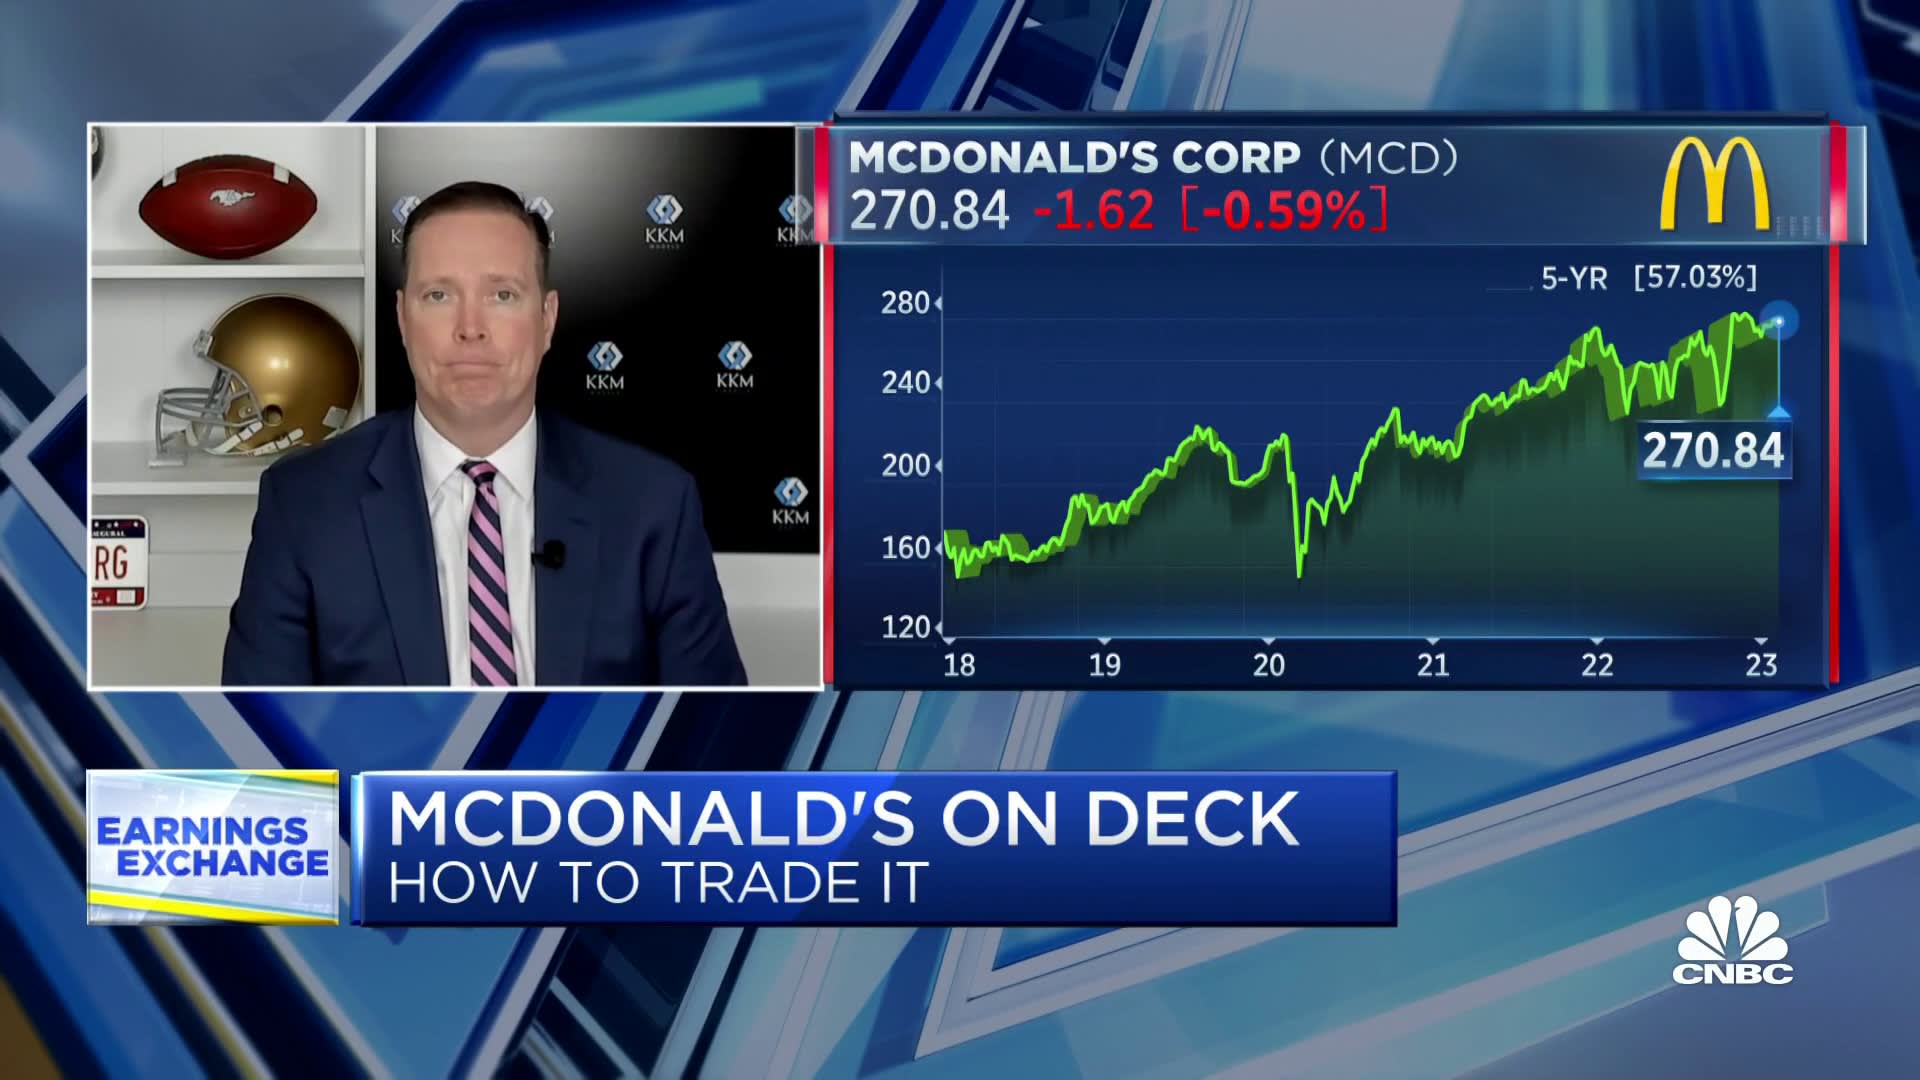 Three stocks to watch ahead of earnings: CAT, NXPI and MCD